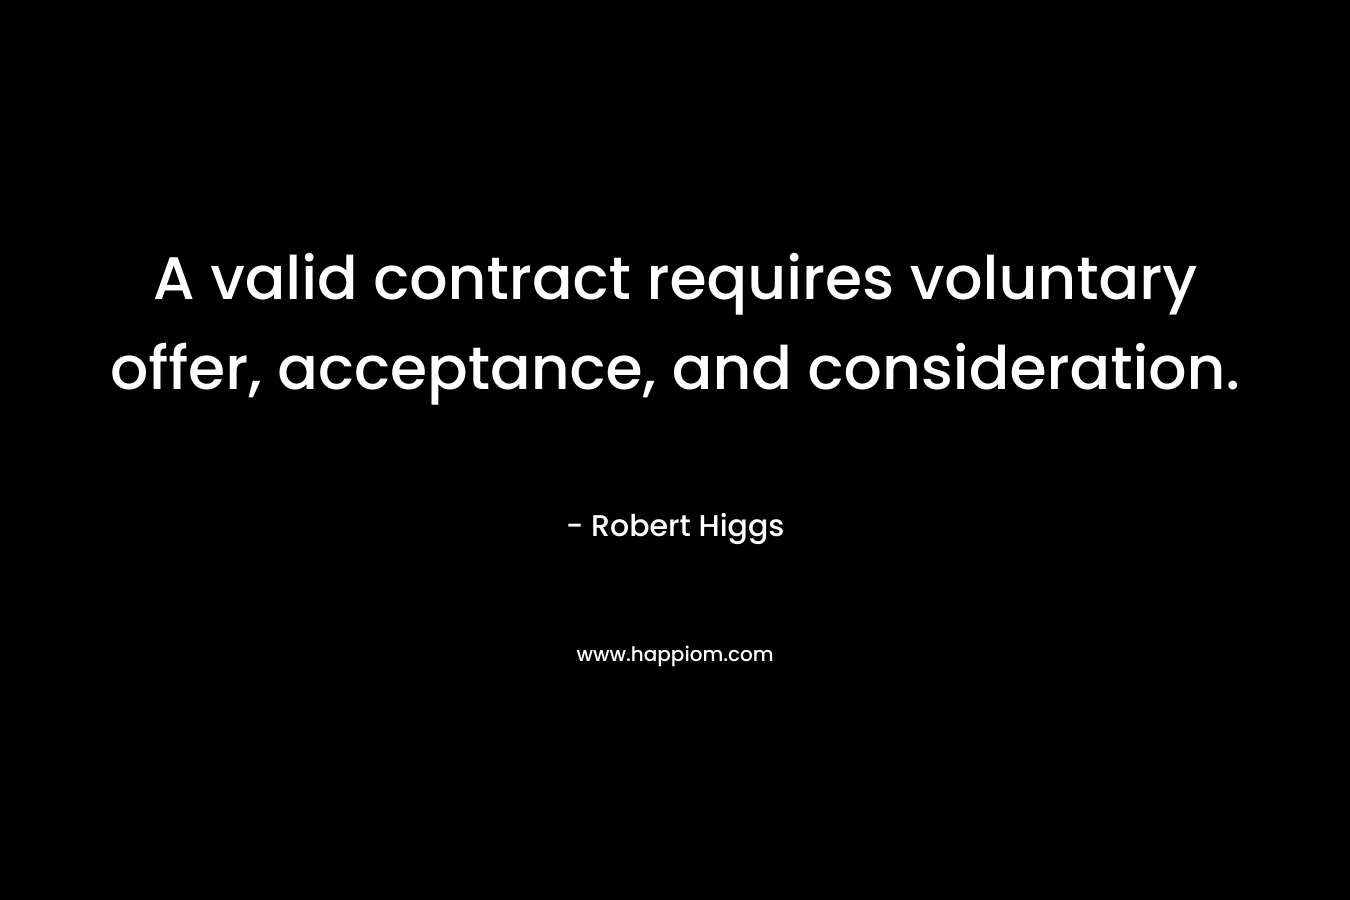 A valid contract requires voluntary offer, acceptance, and consideration.